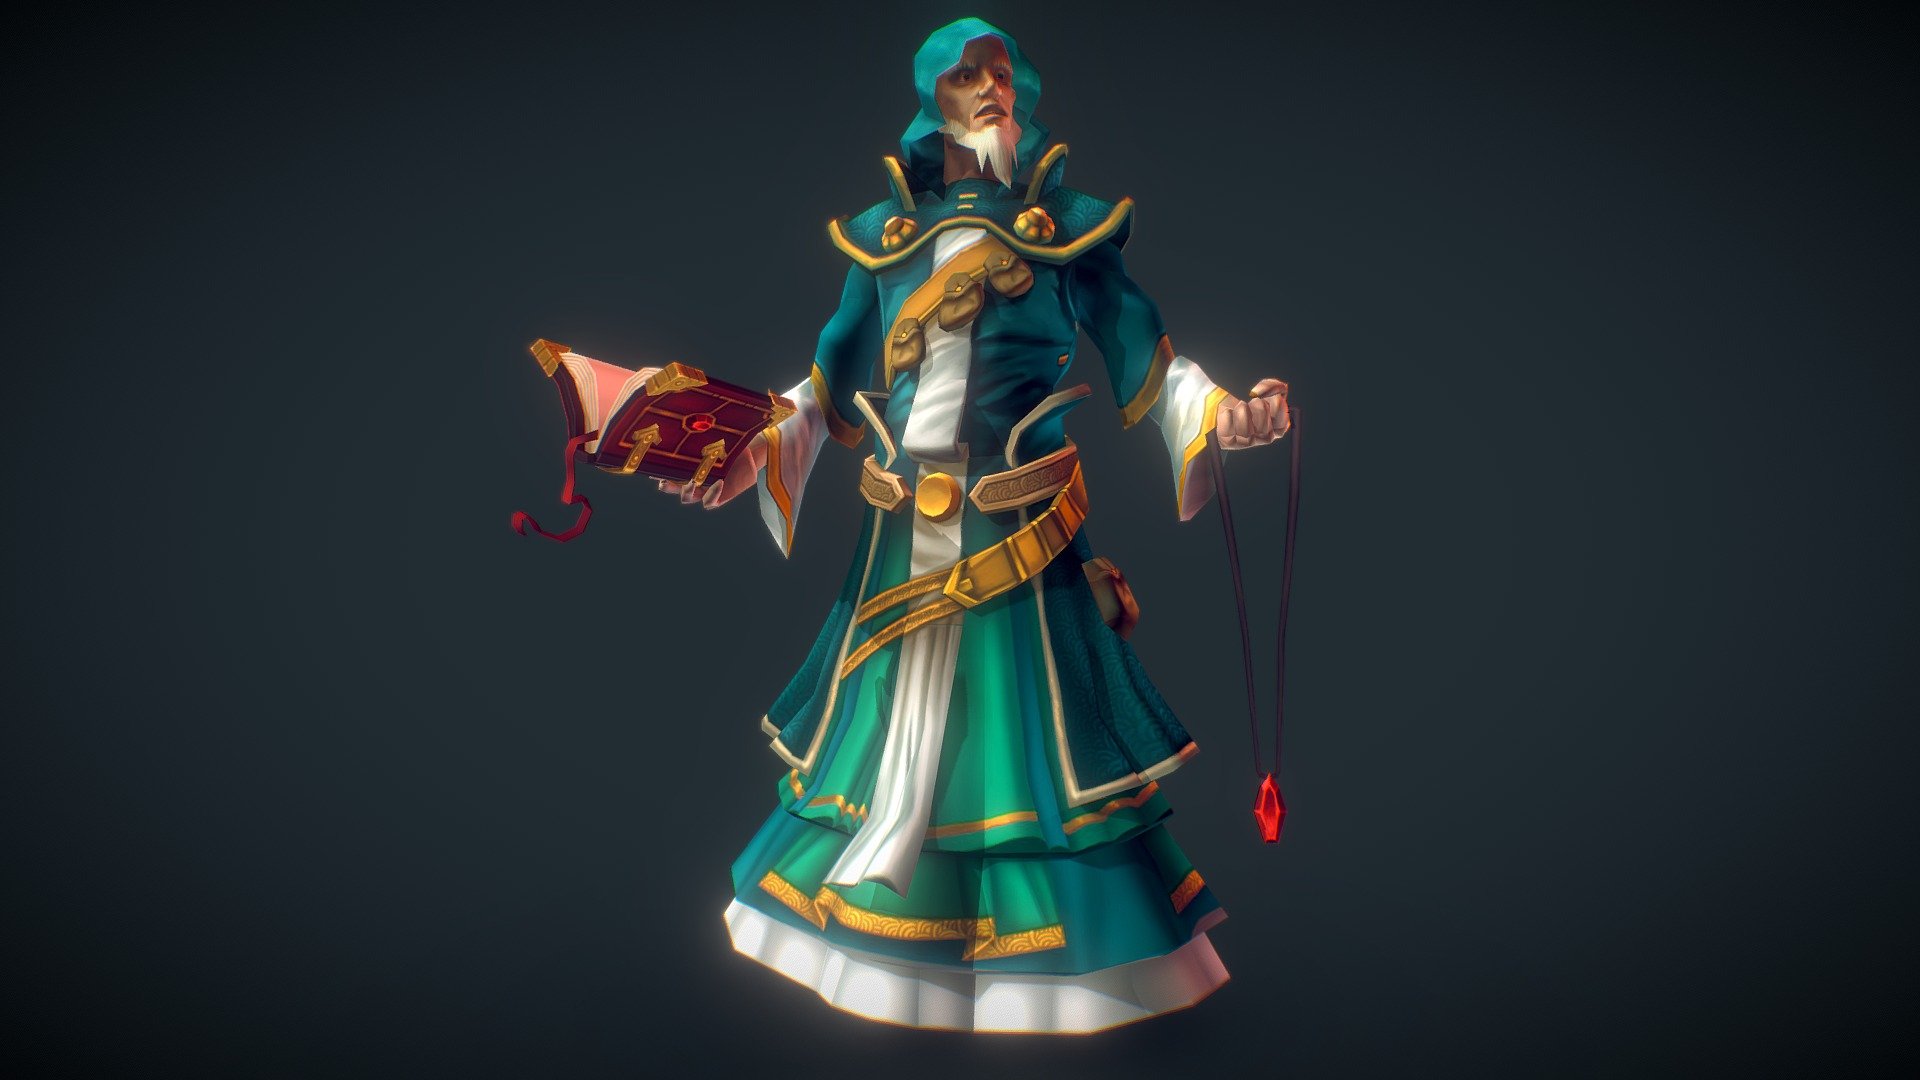 Leoric the mage of descent the board game by Fantasy Flight Games.

**© 2019 Fantasy Flight Publishing, Inc. ** - Fantasy Flight Games - Leoric - 3D model by BitGem 3d model